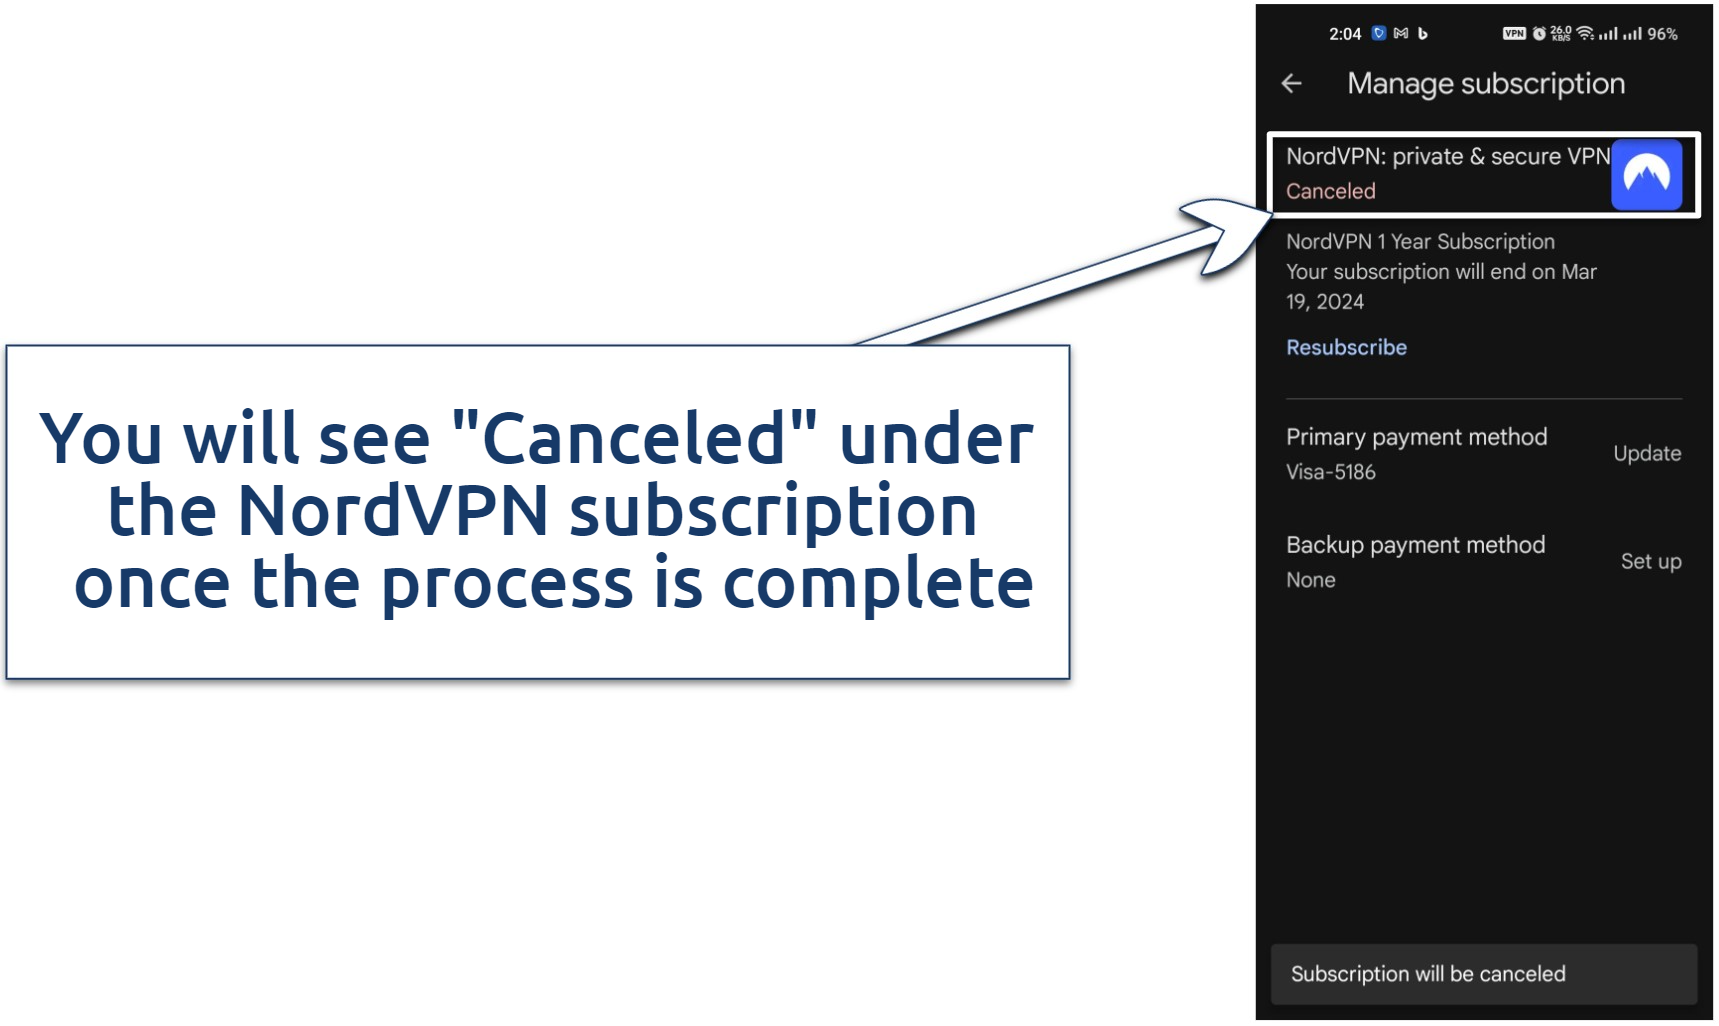 Image showing that NordVPN's subscription is canceled